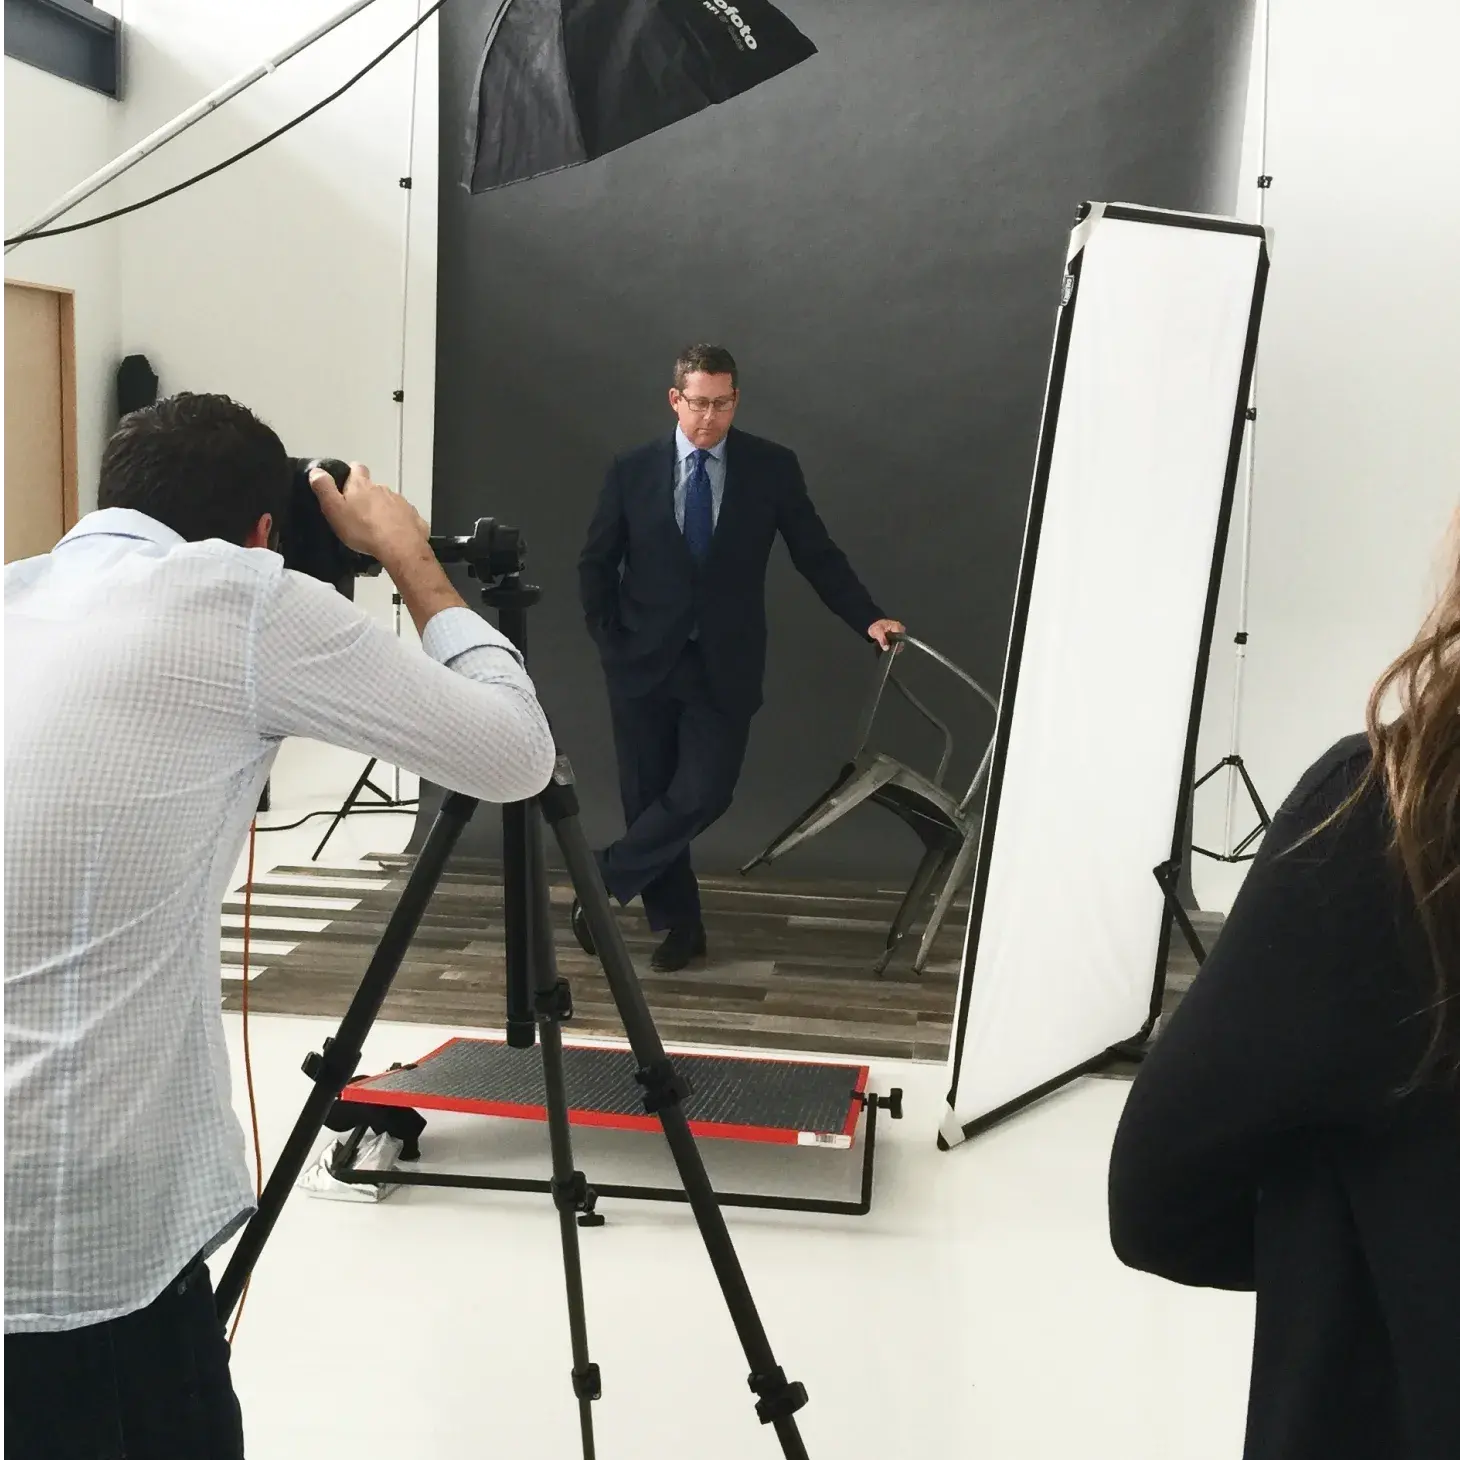 Photoshoot of a man in a suit